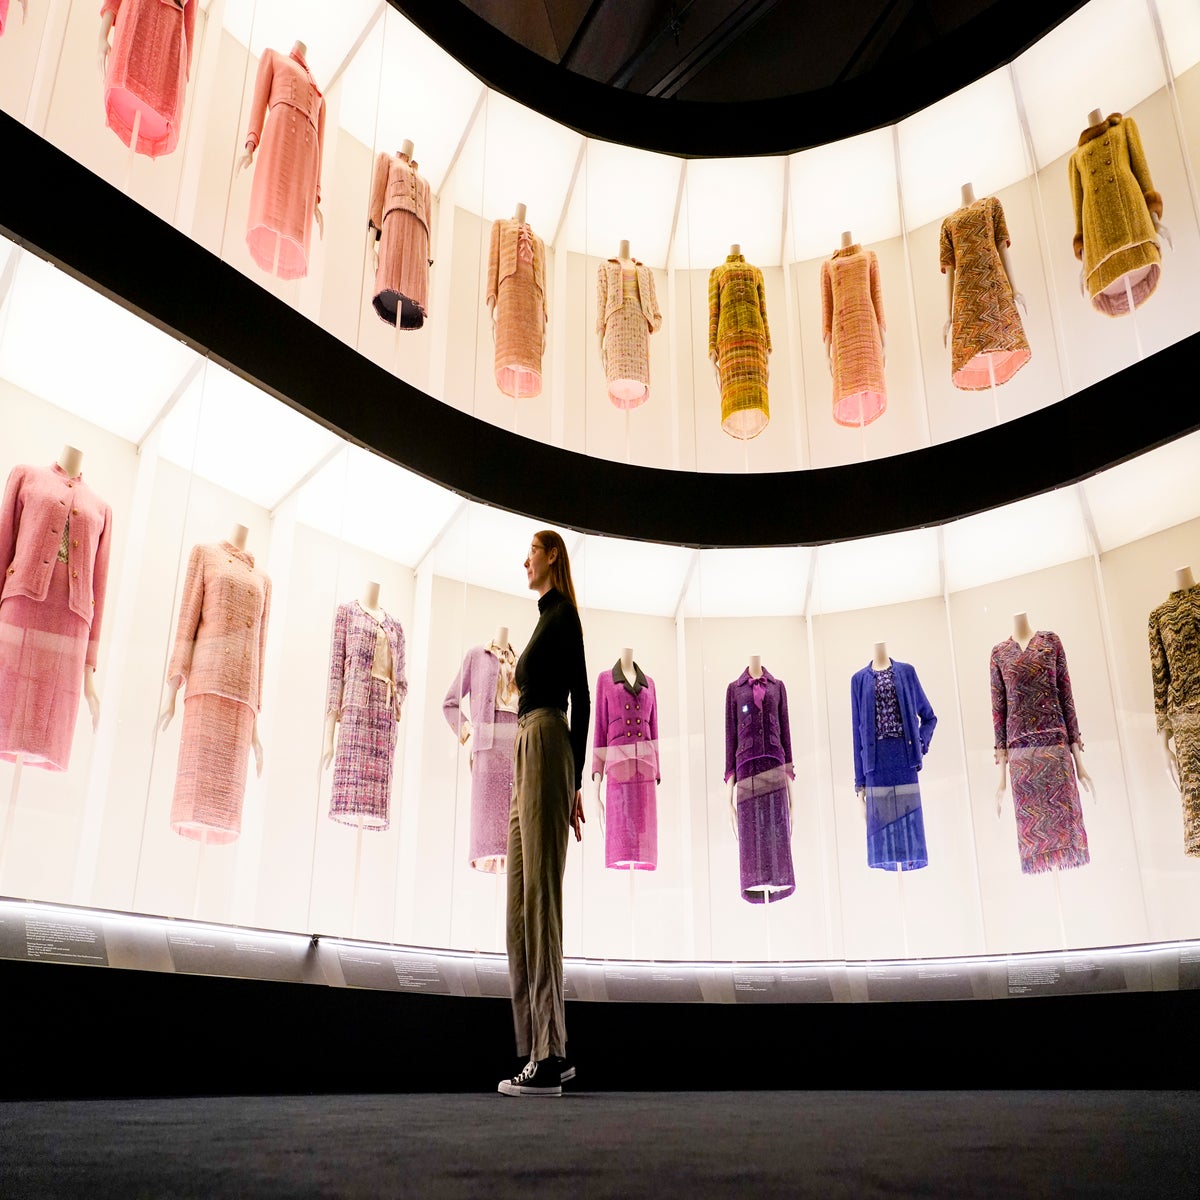 London Fashion Week kicks off with Coco Chanel exhibition at the